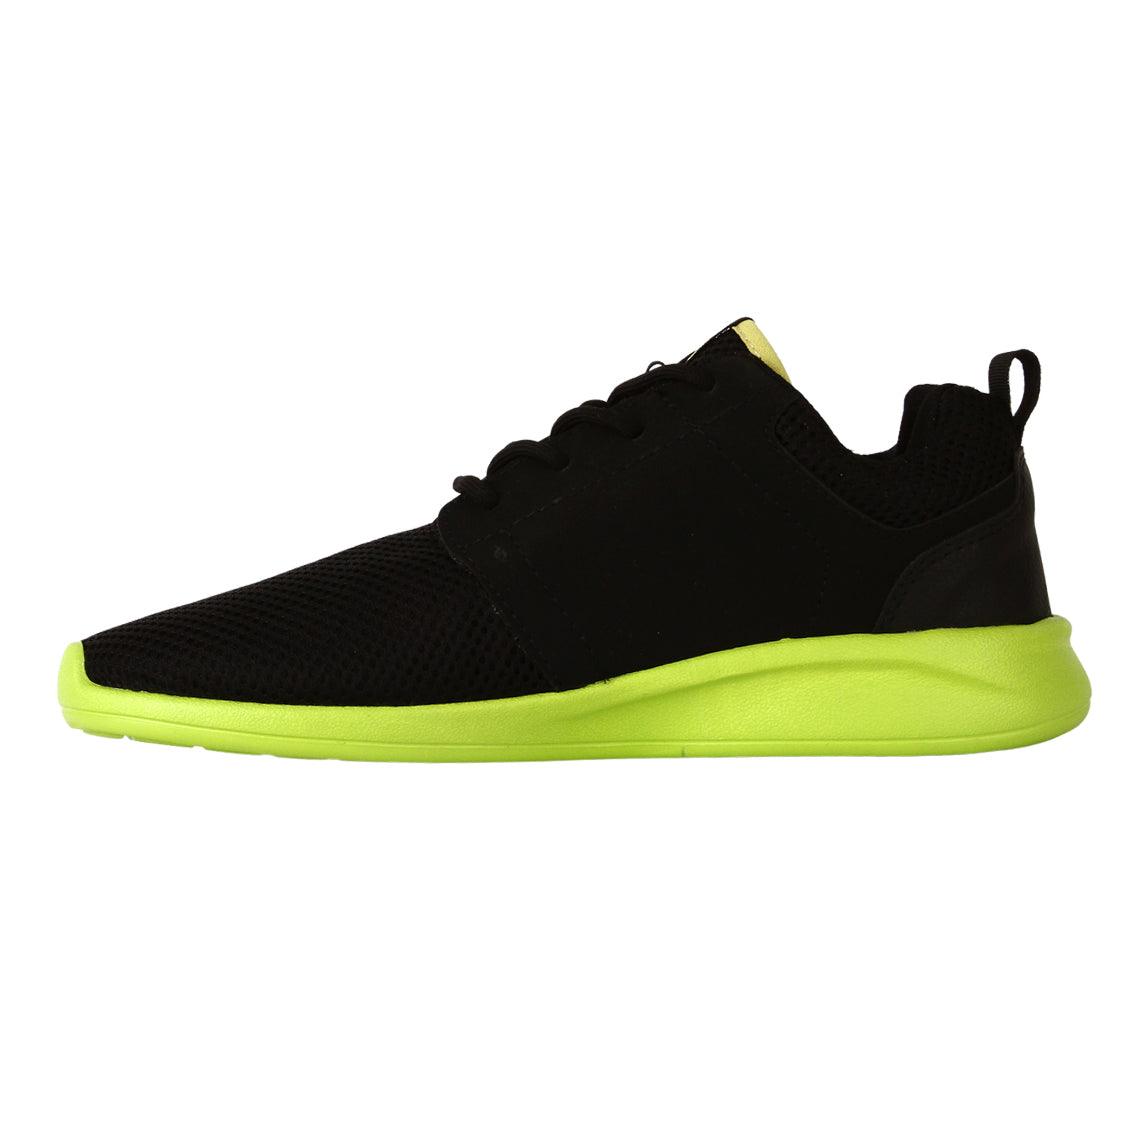 Zapatillas Dc Midway Sn Knit Negro Verde - Indy